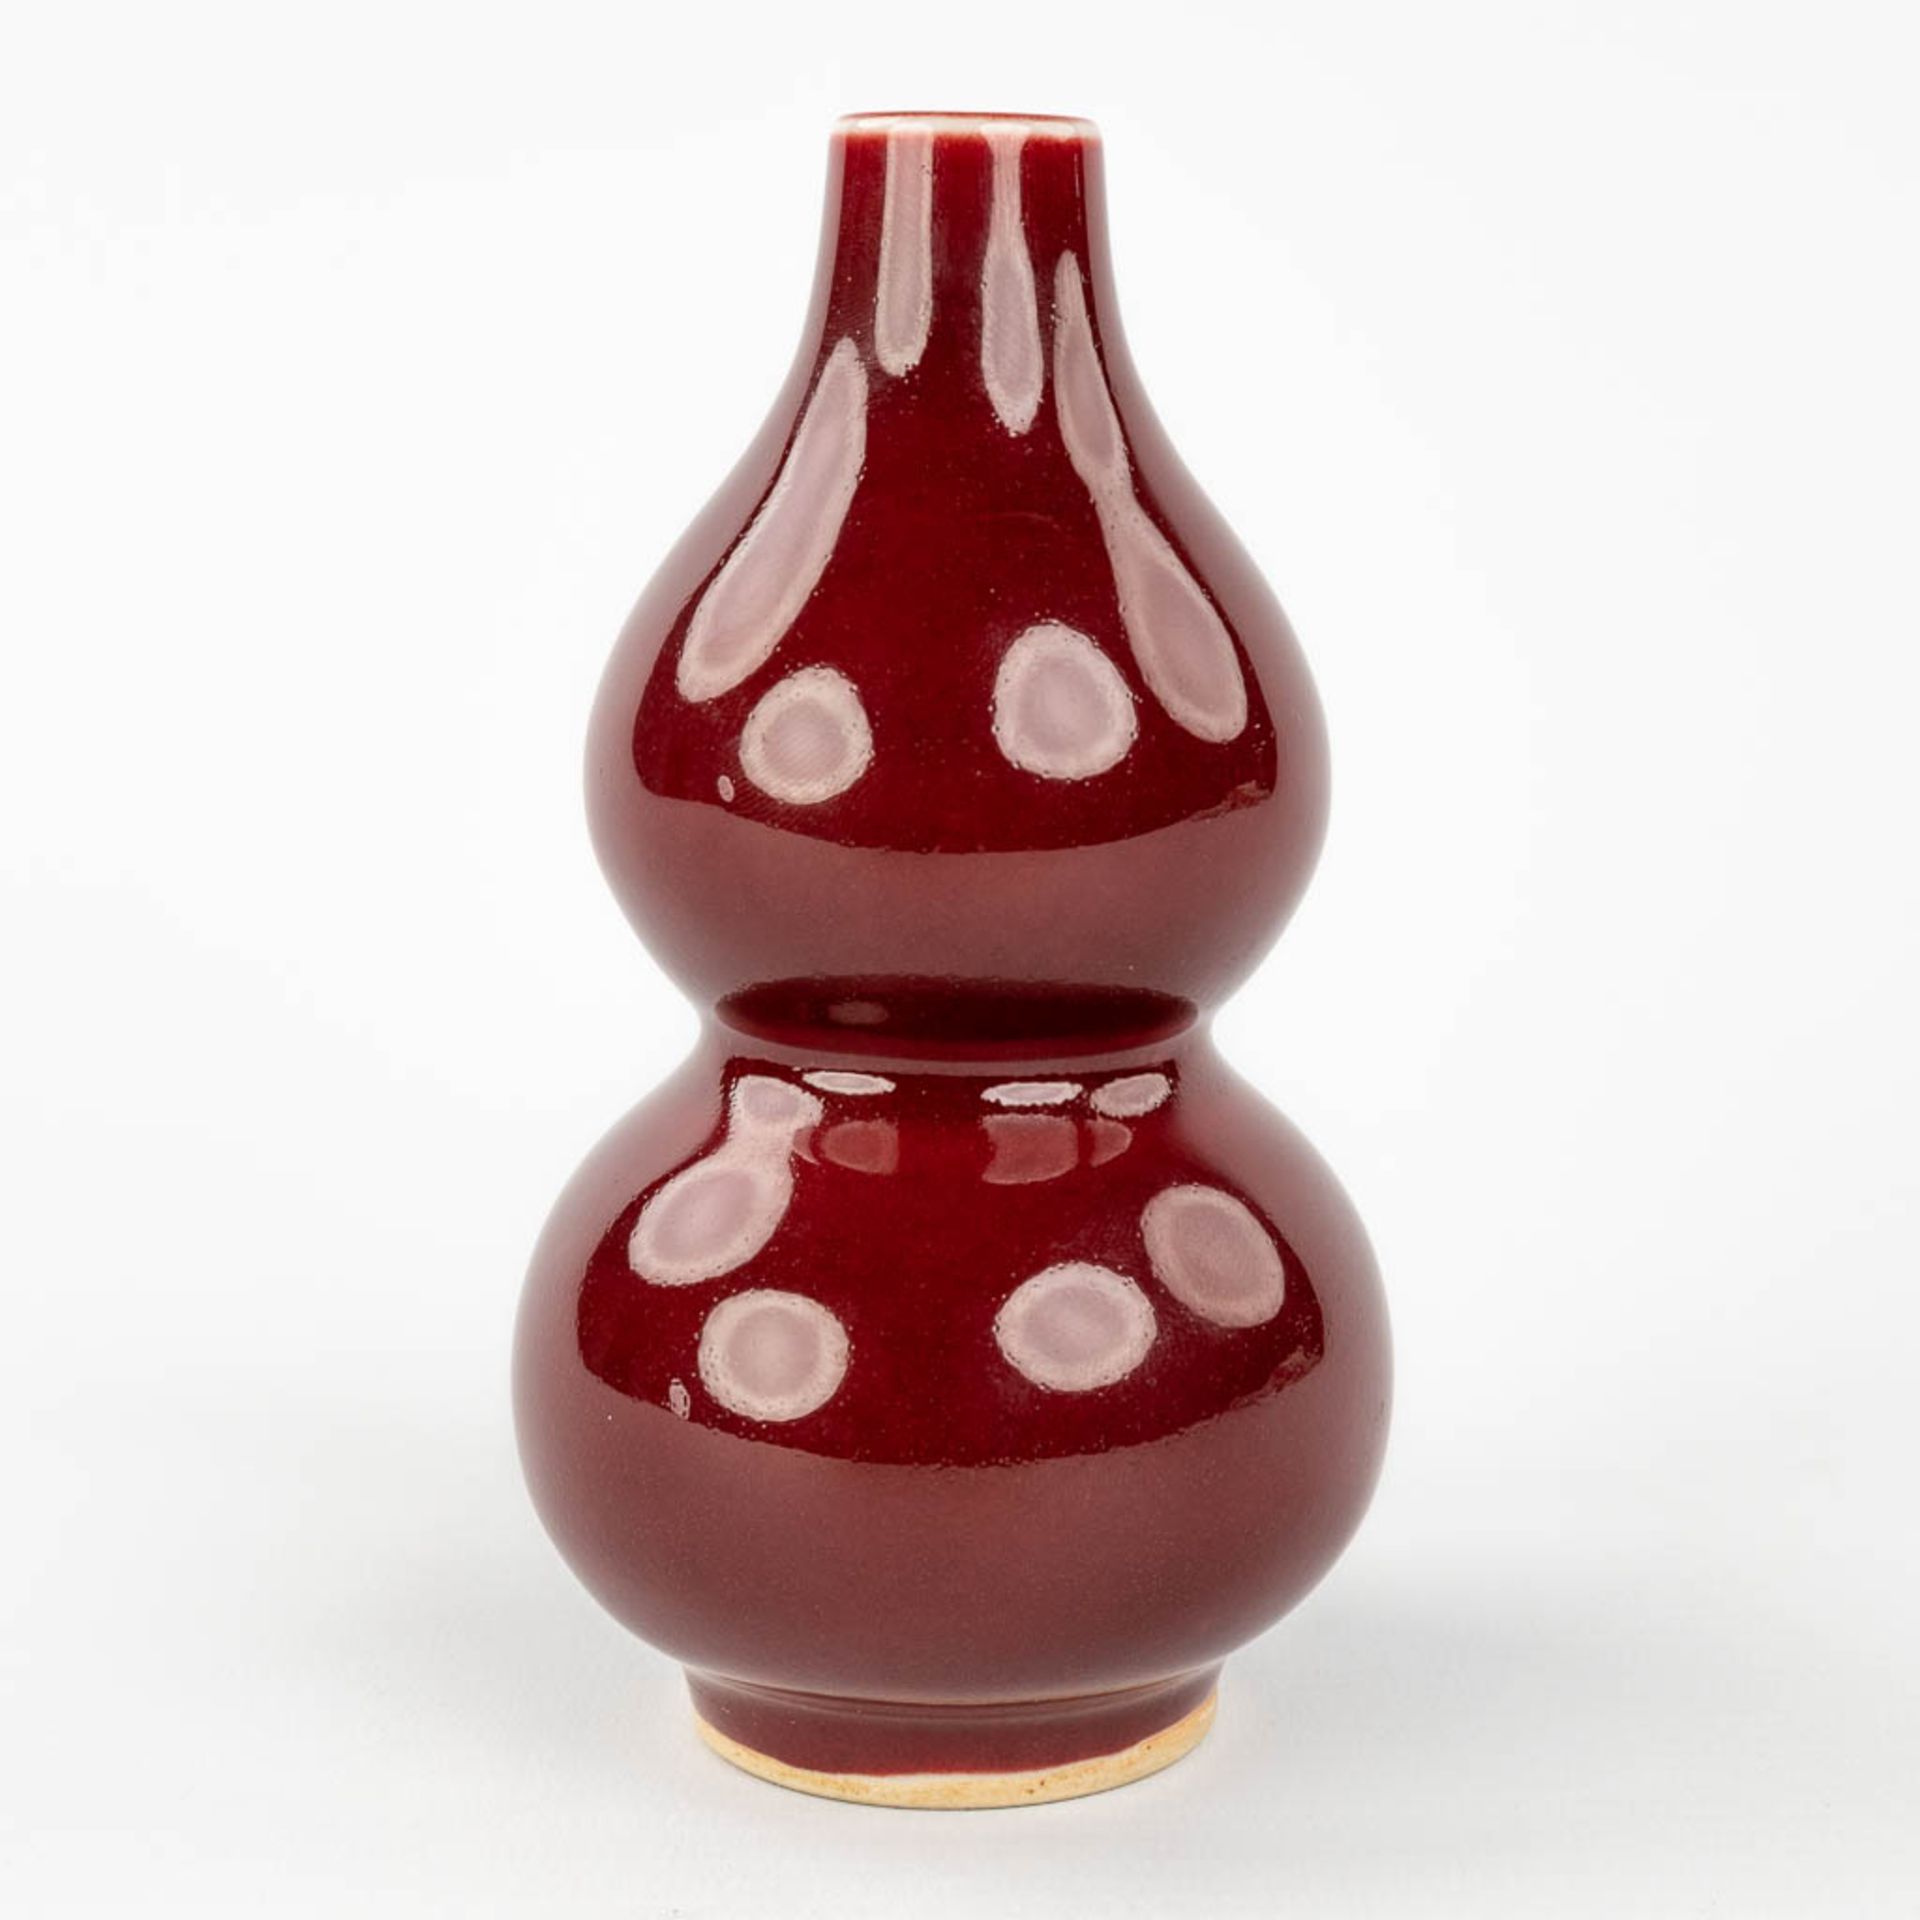 A Chinese double gourd vase, Sang De Boeuf glaze, 19th/20th century. (H: 13 x D: 7,5 cm) - Image 5 of 8